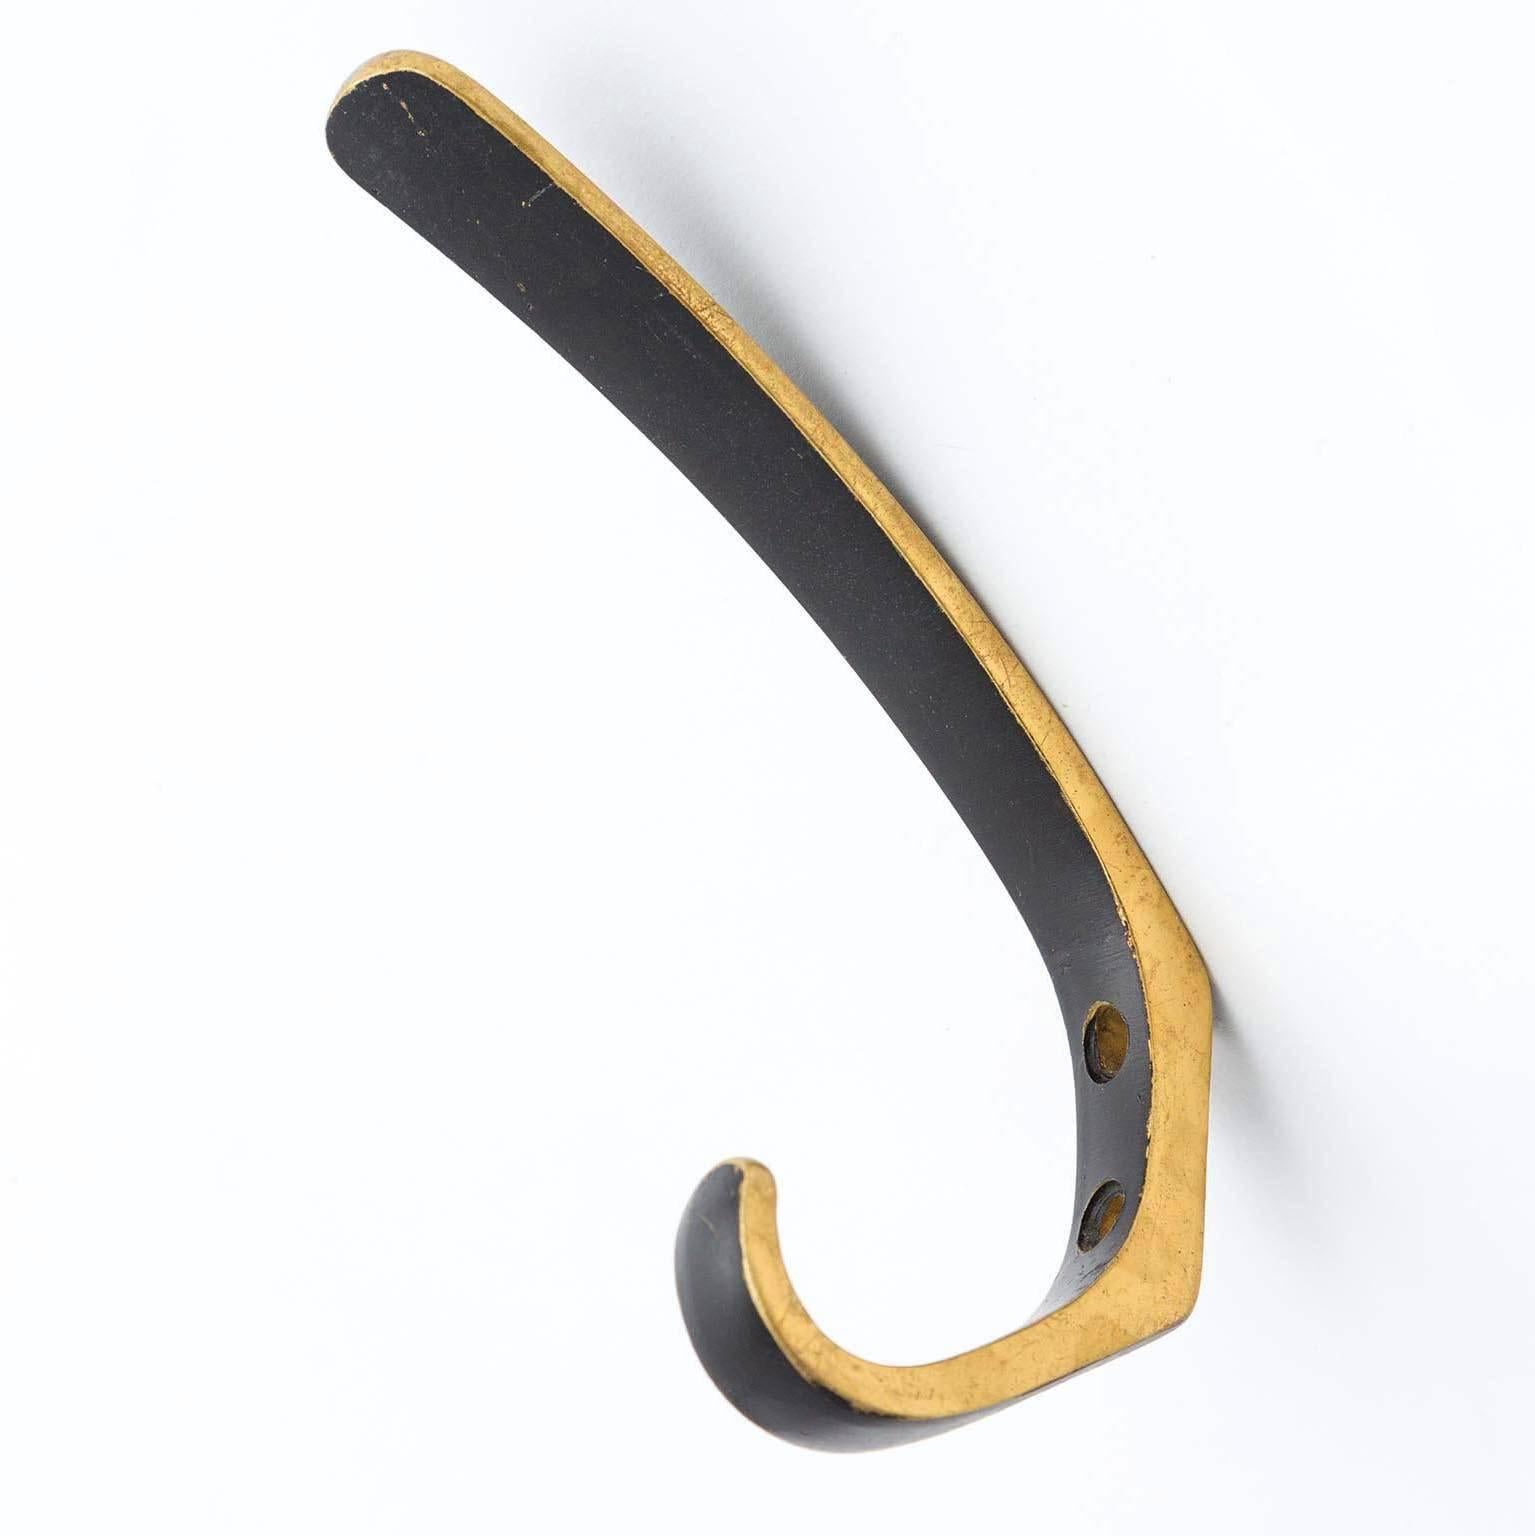 One of six beautiful Austrian brass hooks by Hertha Baller, Austria, manufactured in midcentury (1950s-1960s). They are made of blackened and partly polished brass. Lovely patina.
Priced and sold individually.
